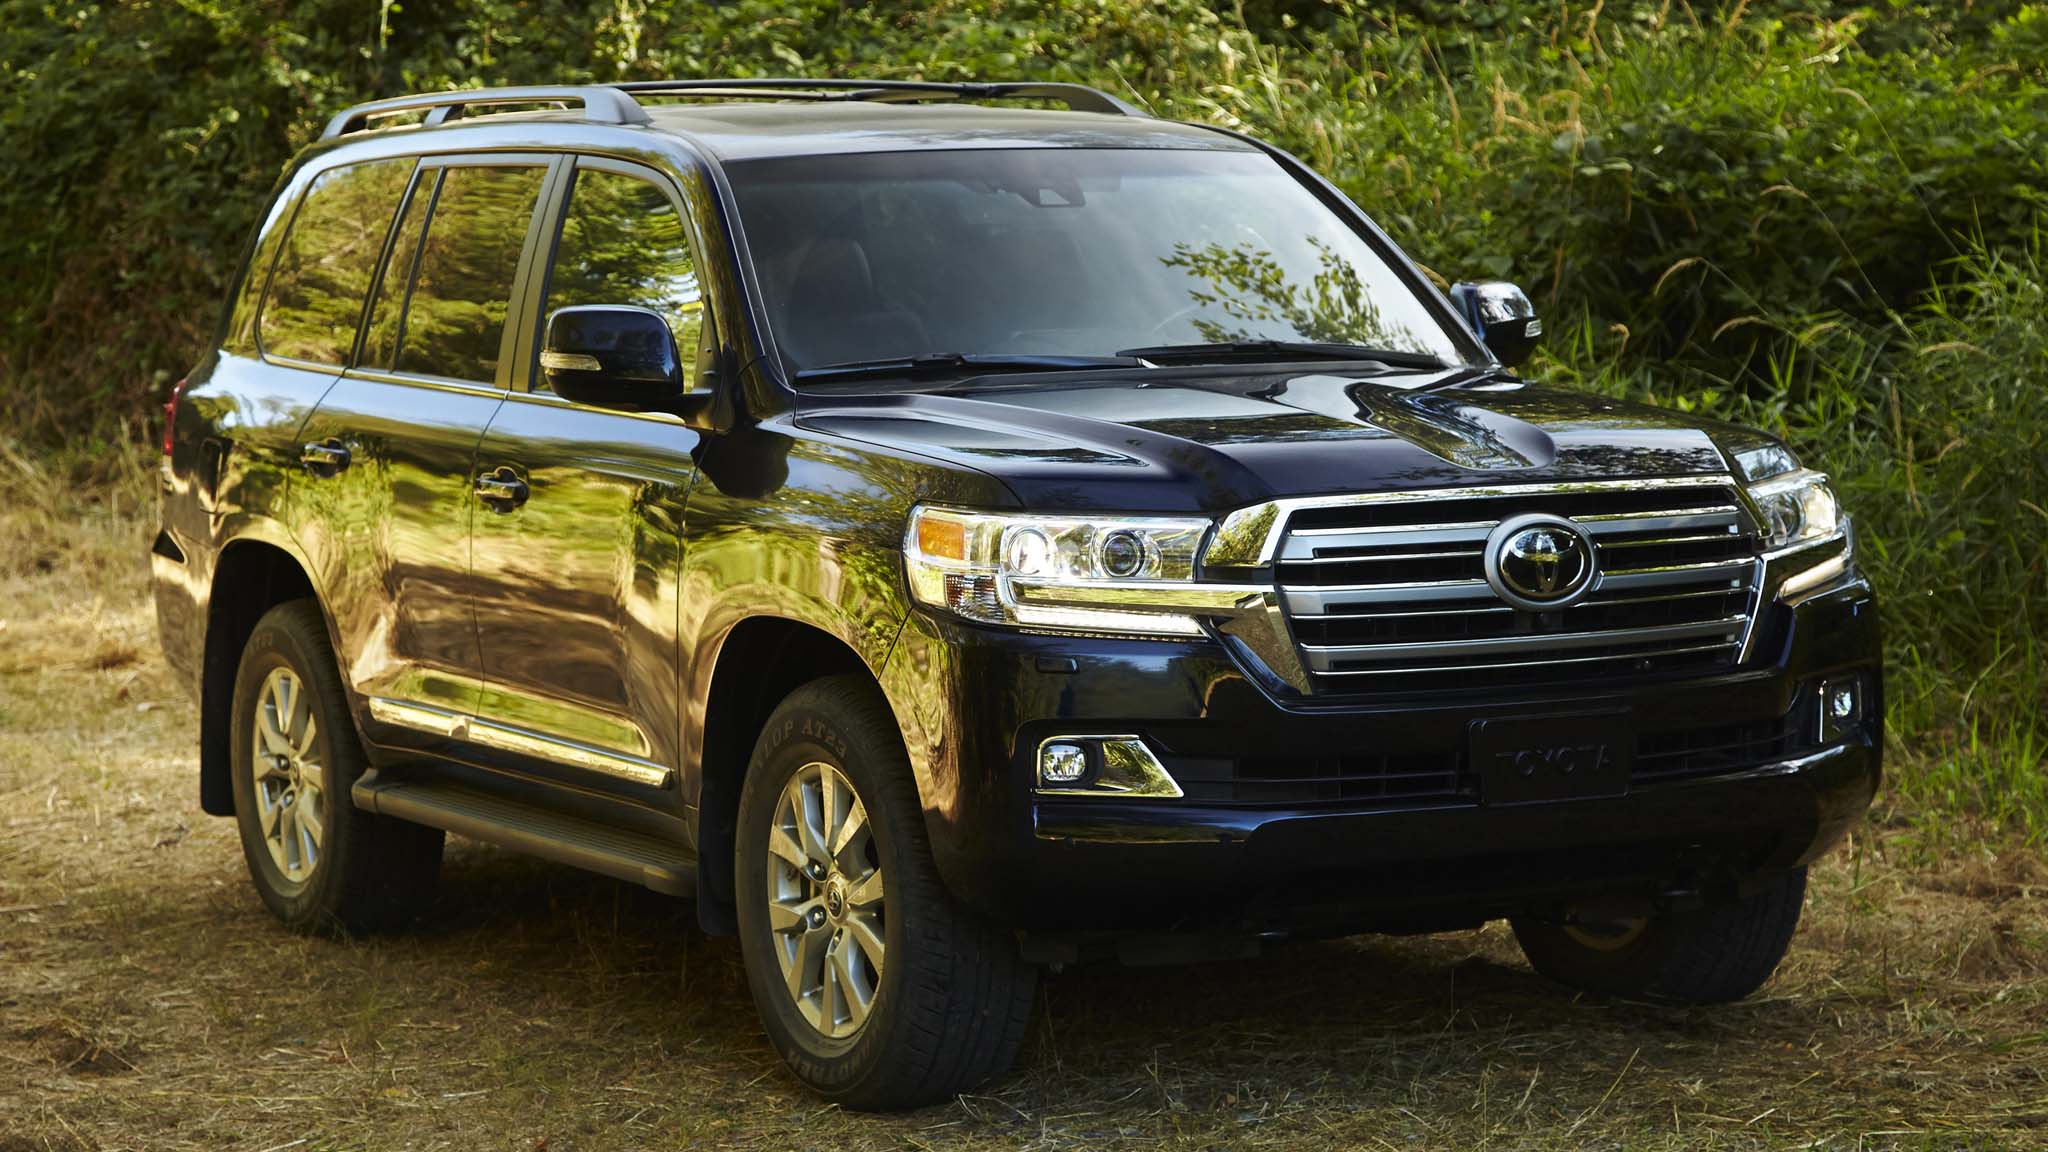 Toyota Land Cruiser Buyer's Guide: Reviews, Specs, Comparisons